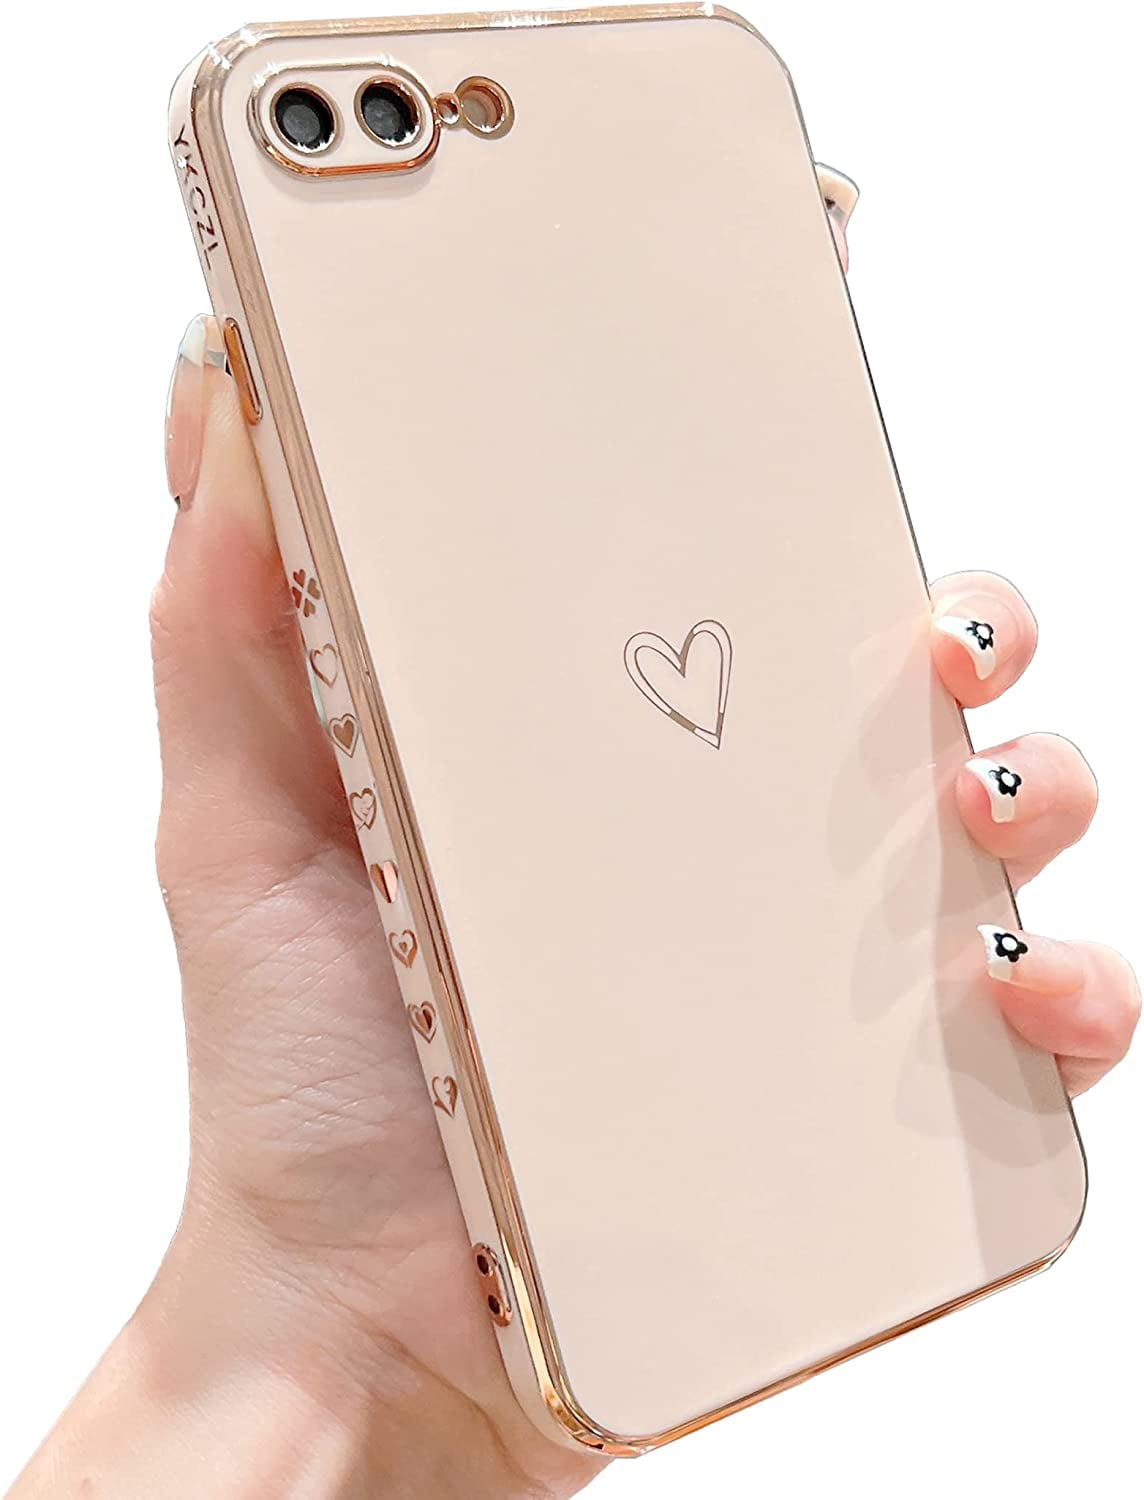 DAIZAG Case Compatible with iPhone 8 Plus Case,Butterfly Pearl Case for iPhone 7 Plus Case,Square Soft TPU Bumper Women Girls Phone Case for iPhone